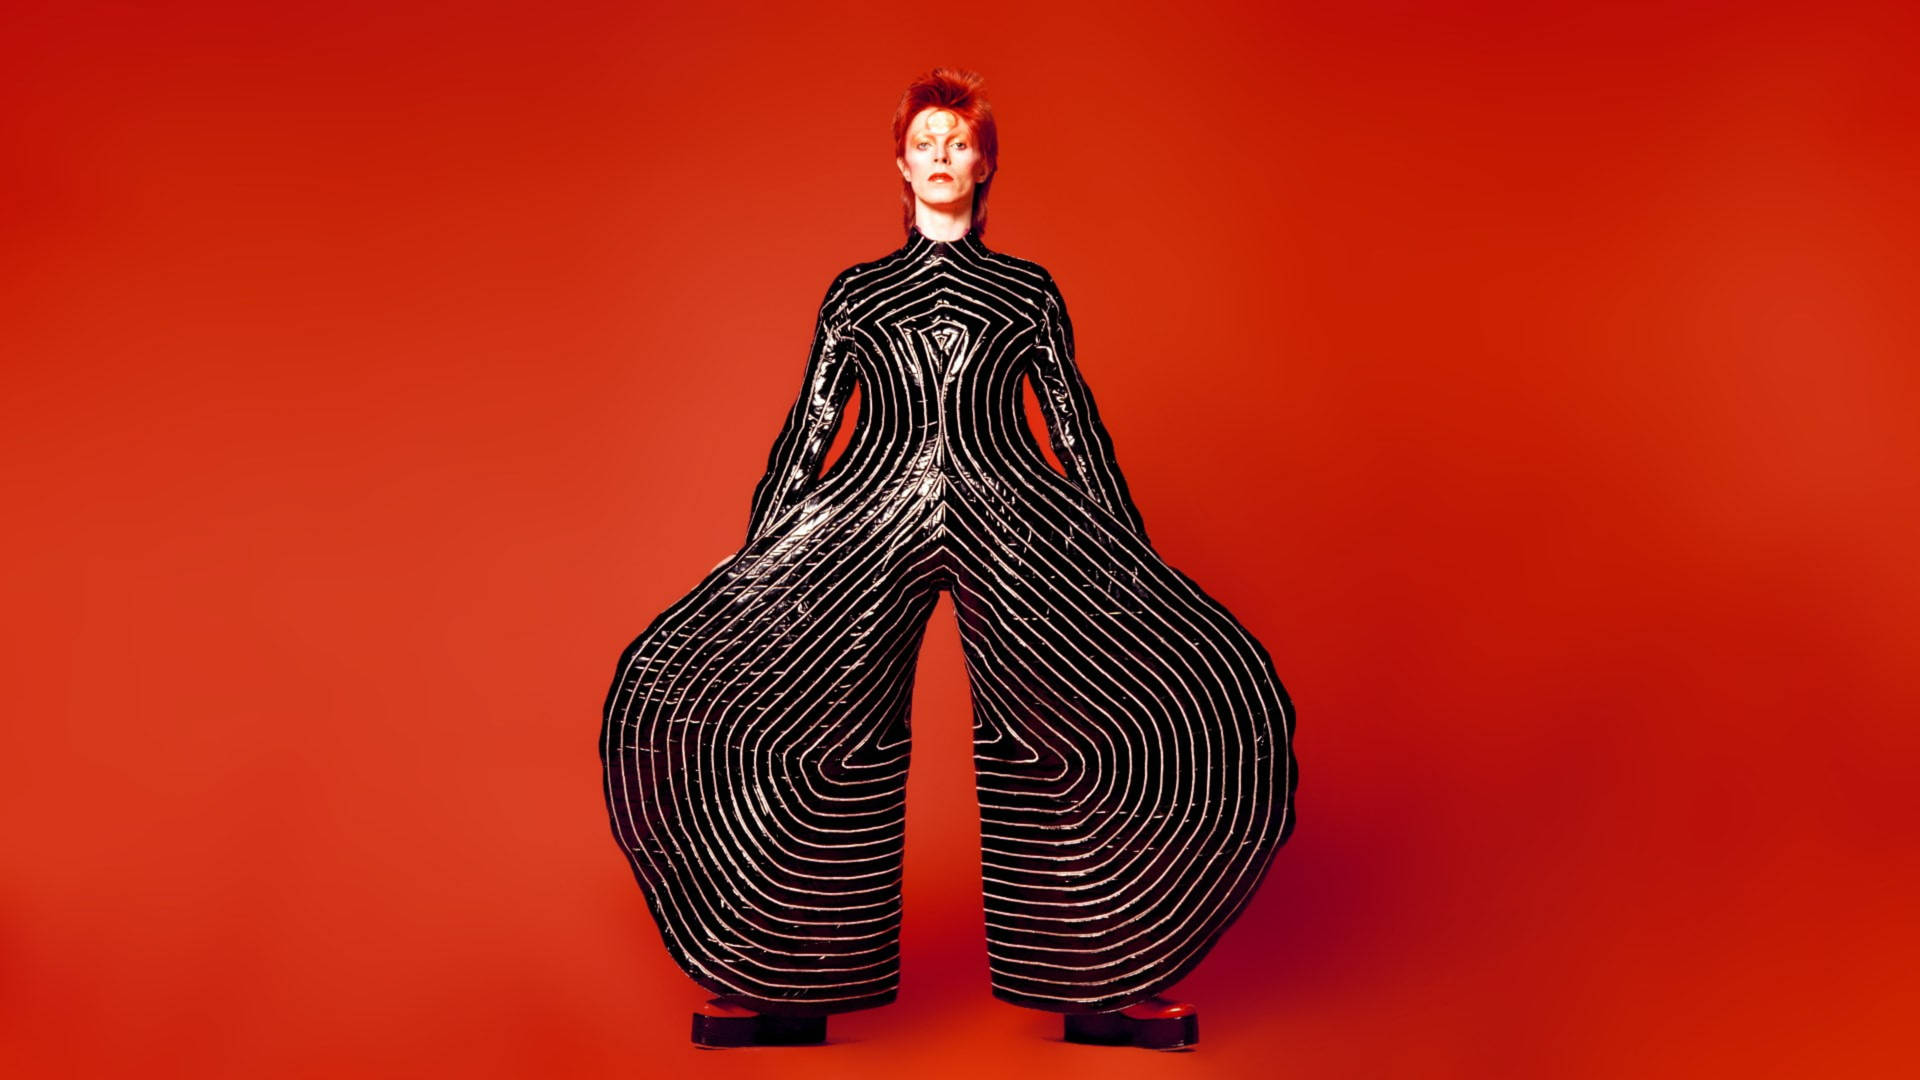 David Bowie Stripes In Red Background